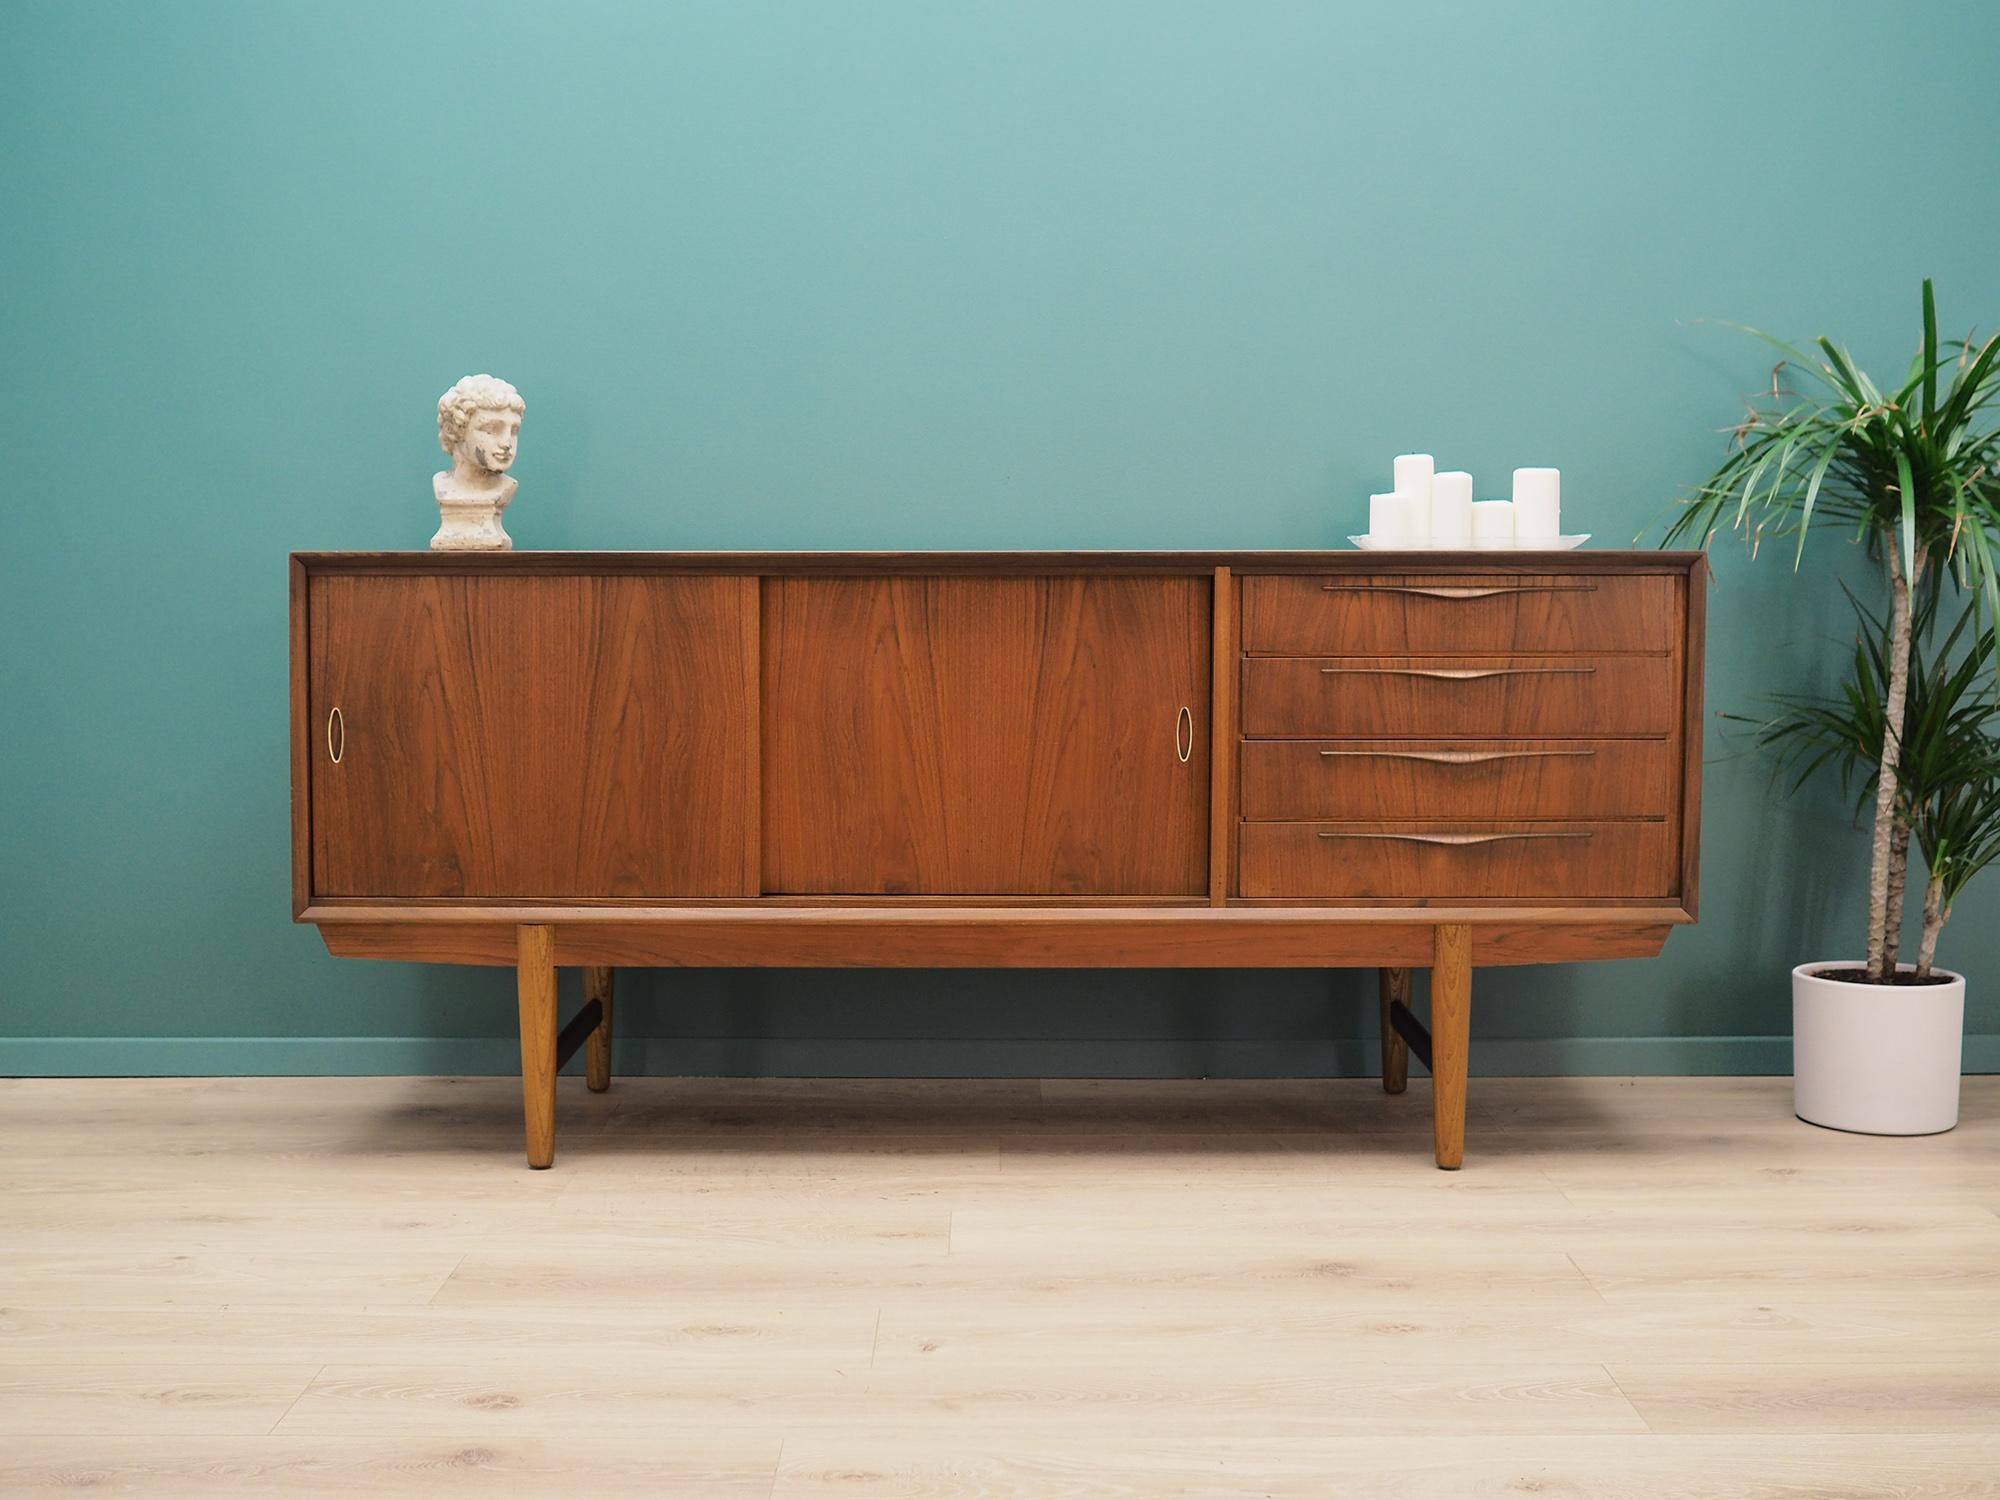 Fantastic sideboard from the 1960s-1970s. Scandinavian design, minimalist form. Furniture is covered with teak veneer, legs are made of solid teak wood. Sideboard has four stylish drawers and a spacious shelf behind a sliding door. Preserved in good